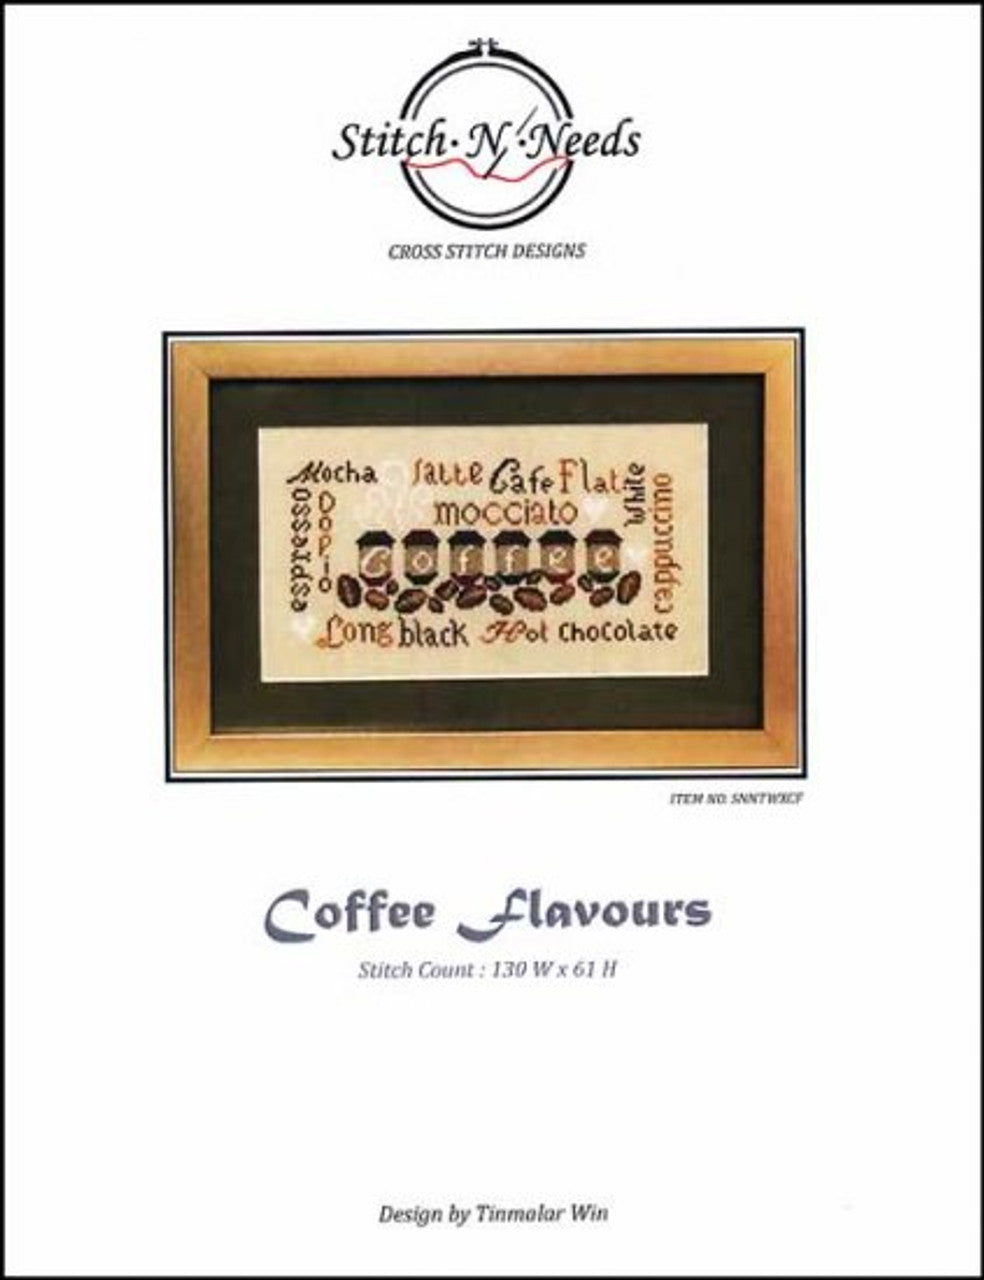 Coffee Flavours by Stitch N Needs